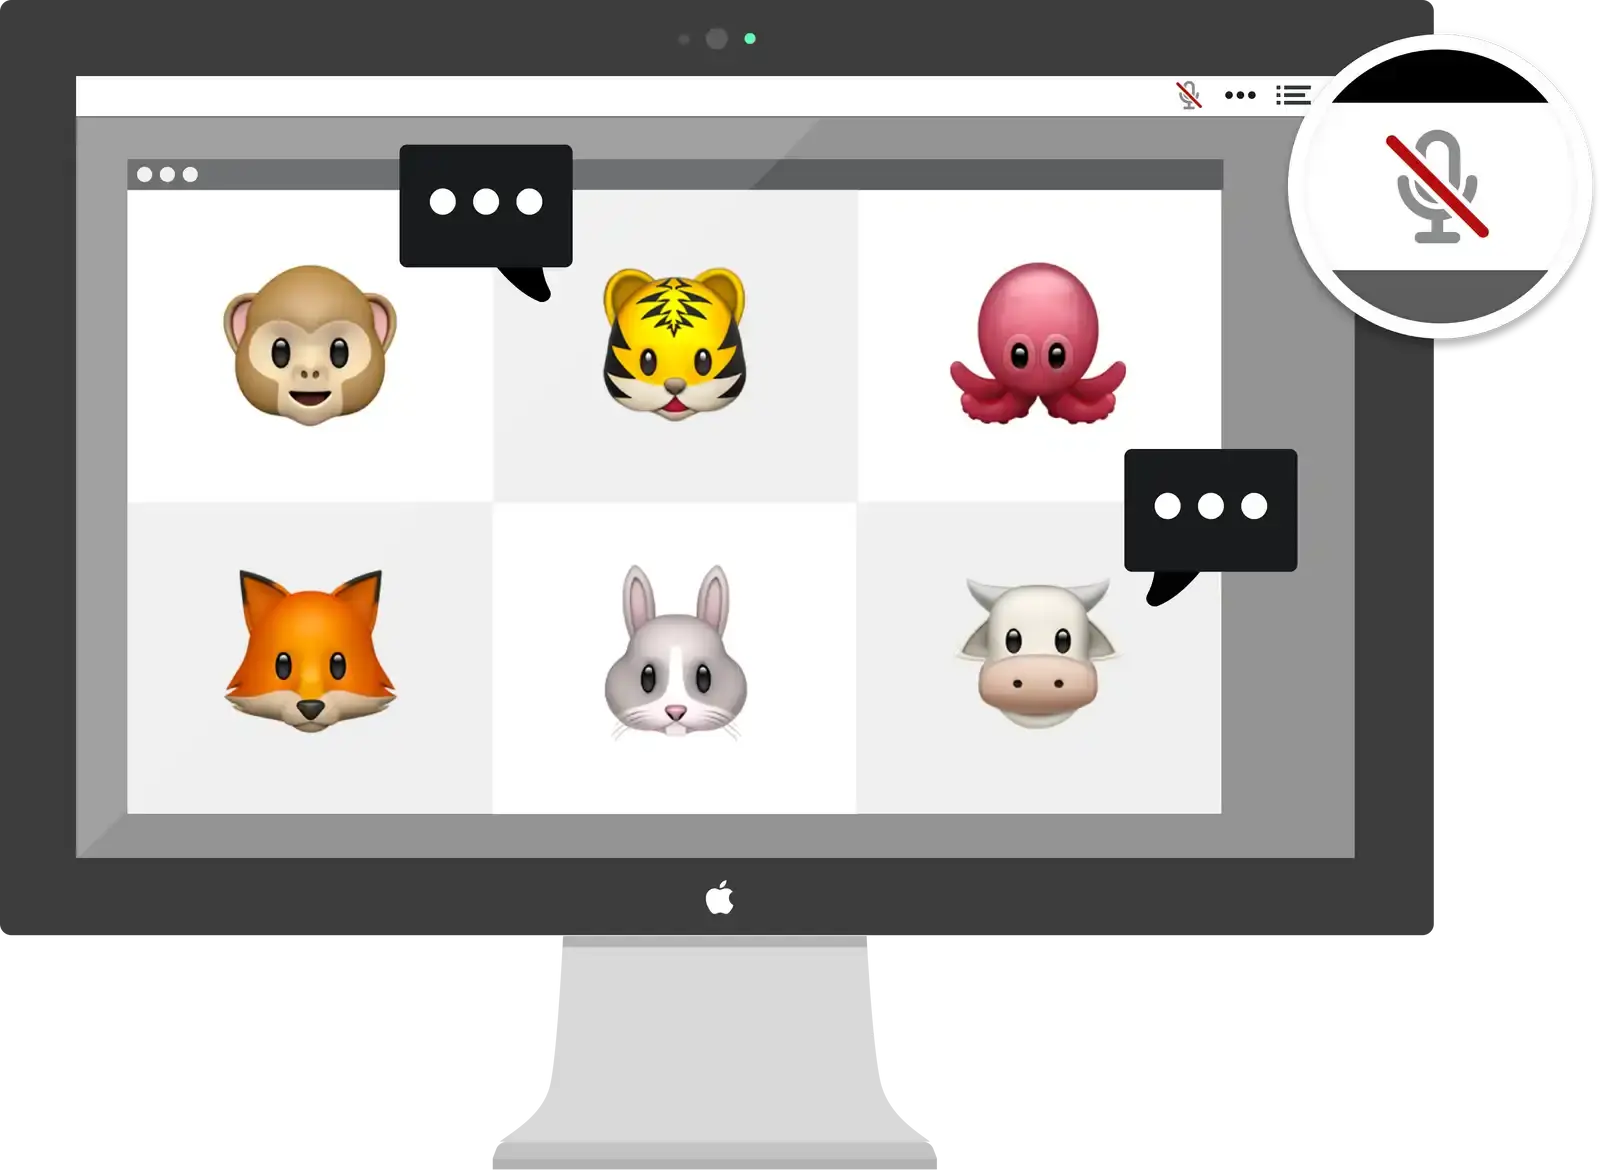 All the emoji animals in a Zoom call, with Mic Drop showing the mic muted in the menubar